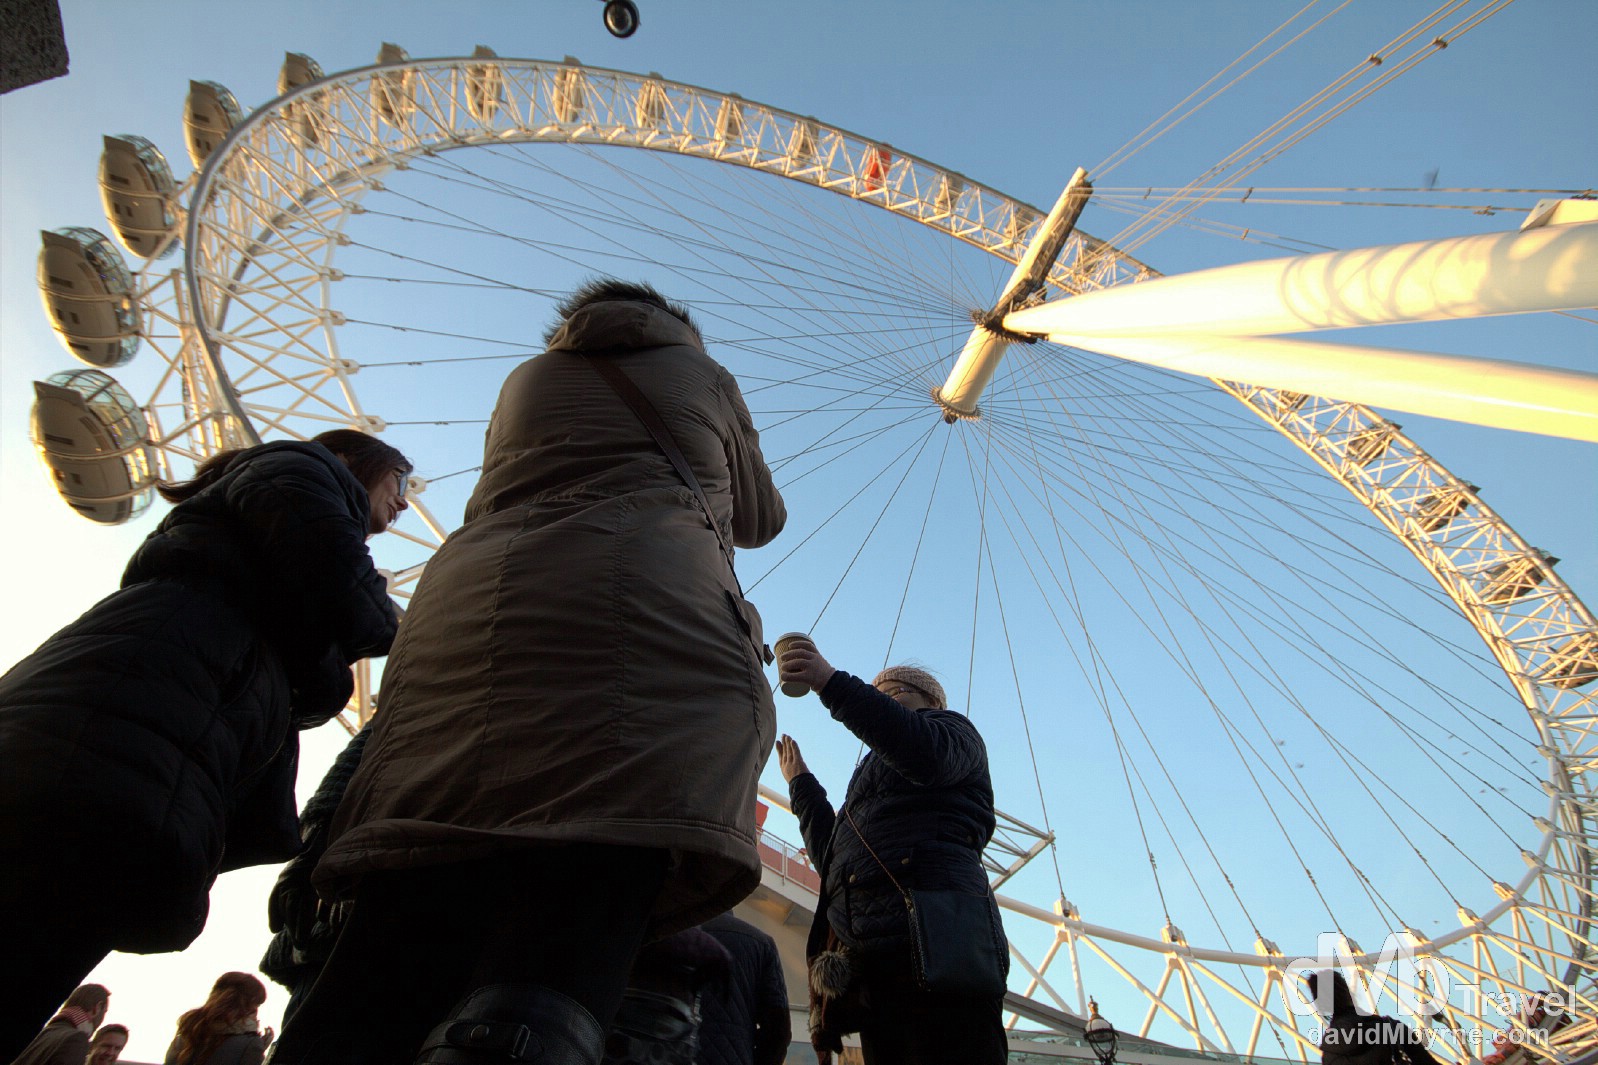 Standing under the London Eye Ferris wheel on the banks of the Thames River in London, England. December 8th 2012. 